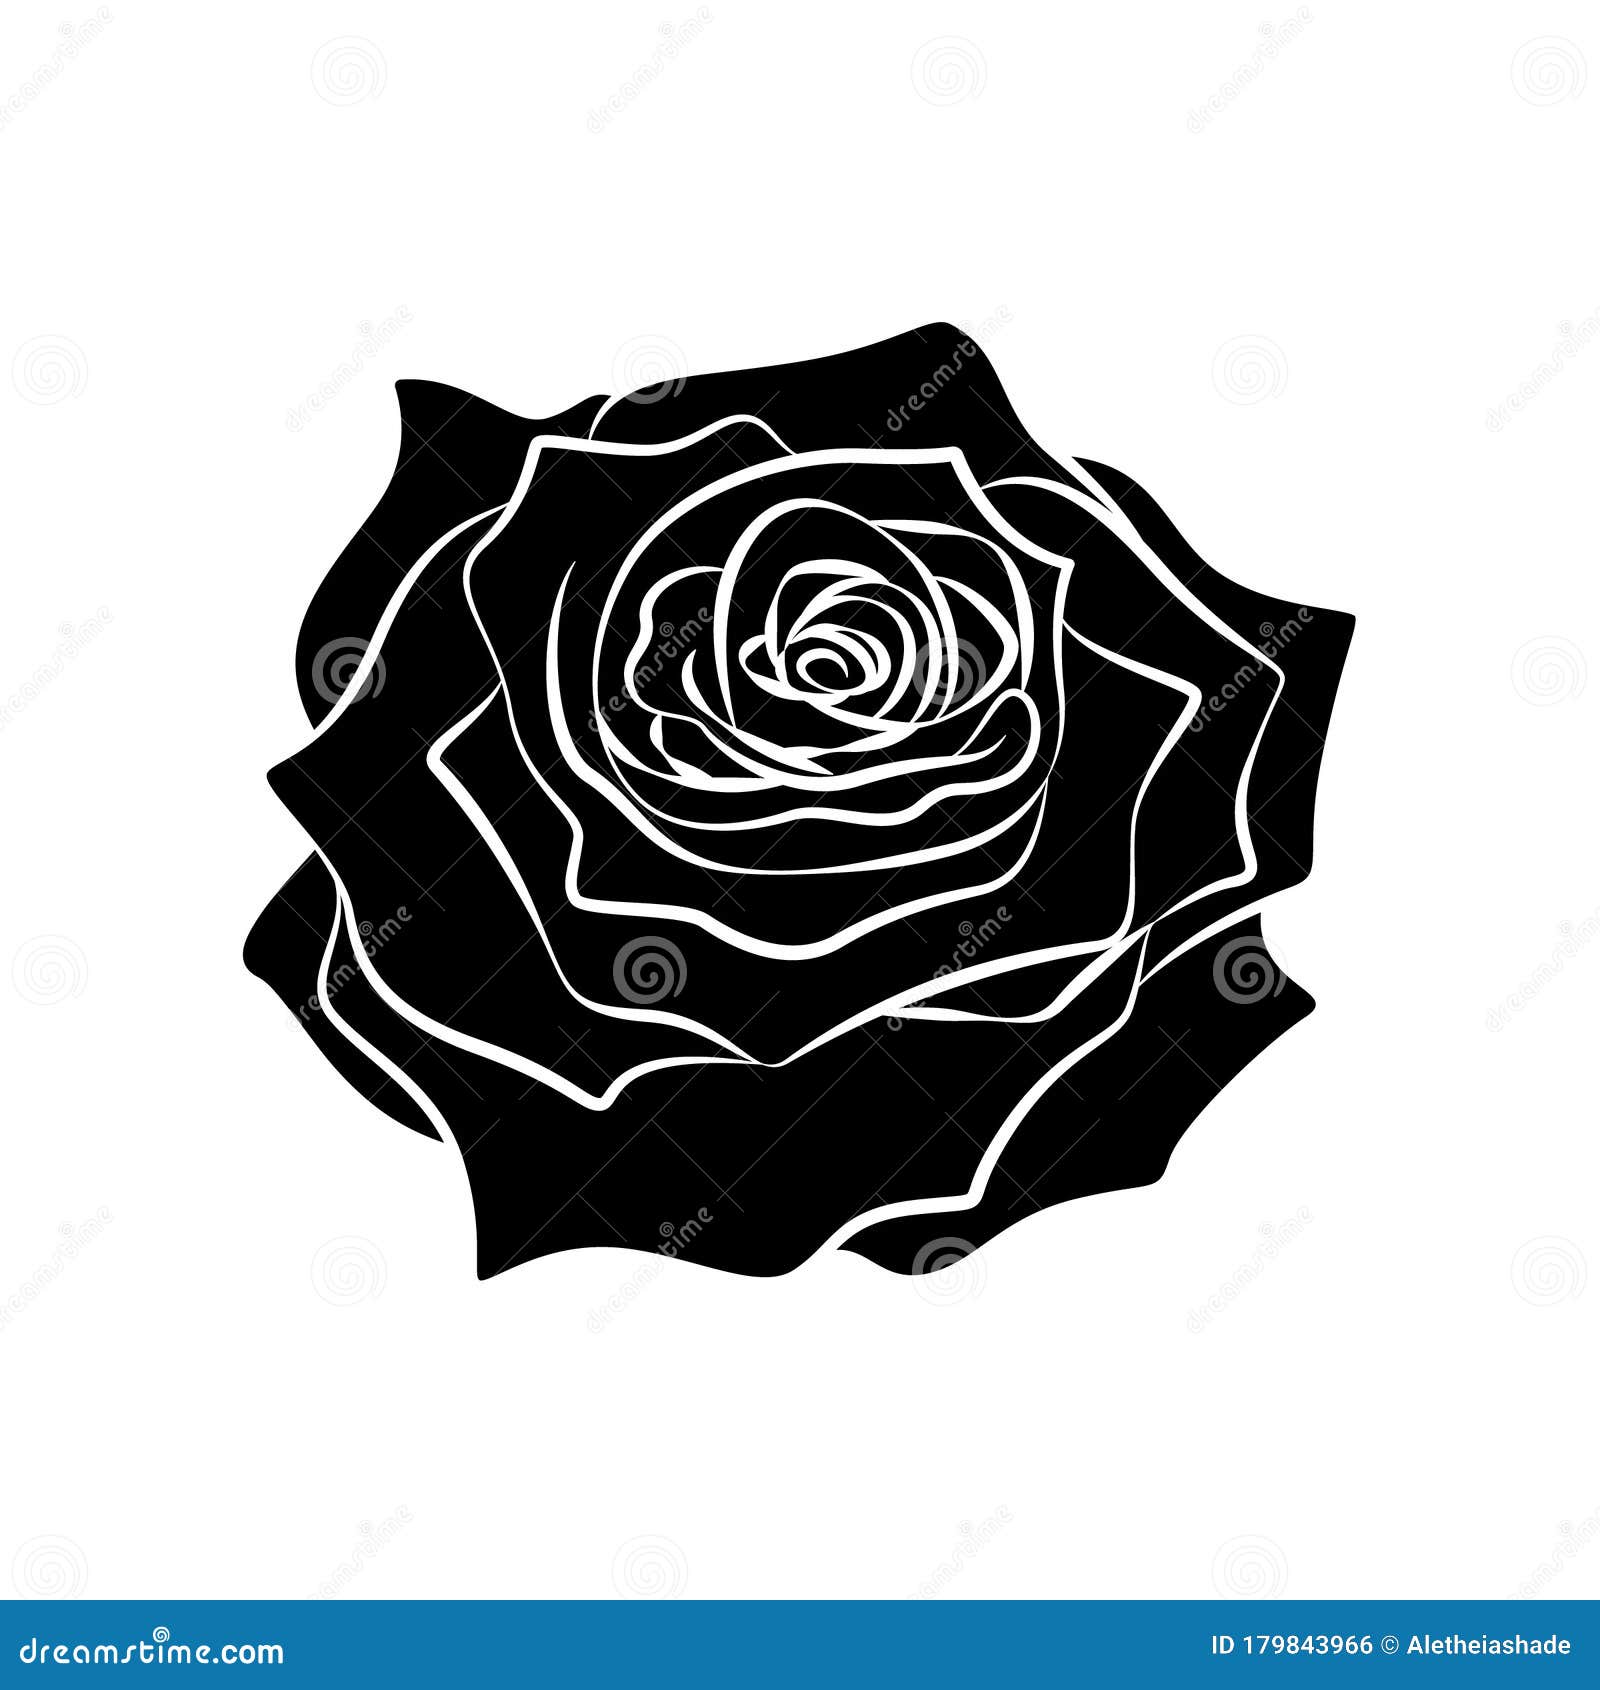 70 Most Beautiful Black Rose Tattoo Designs and Ideas 2022